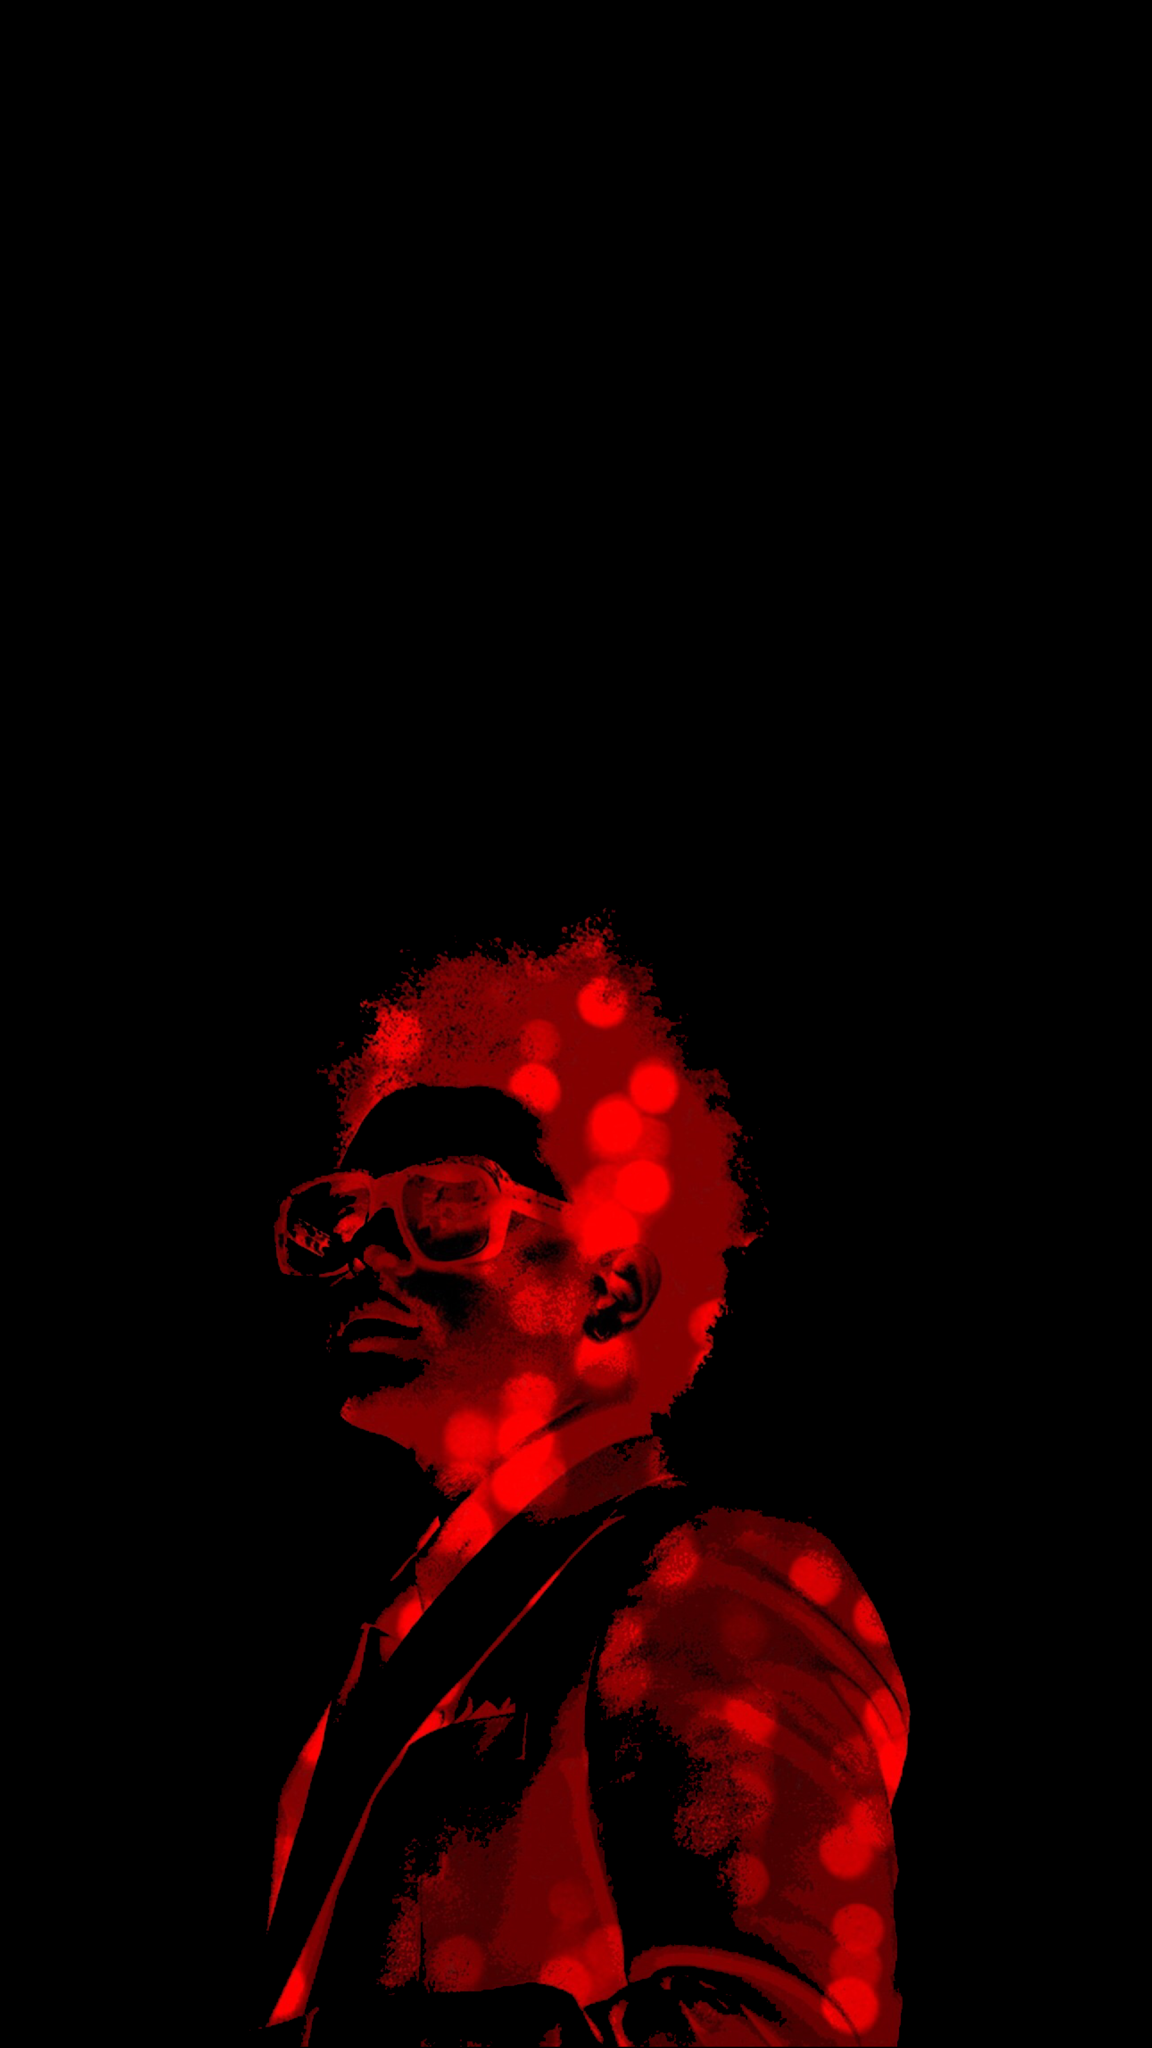 The Weeknd Iphone Wallpapers